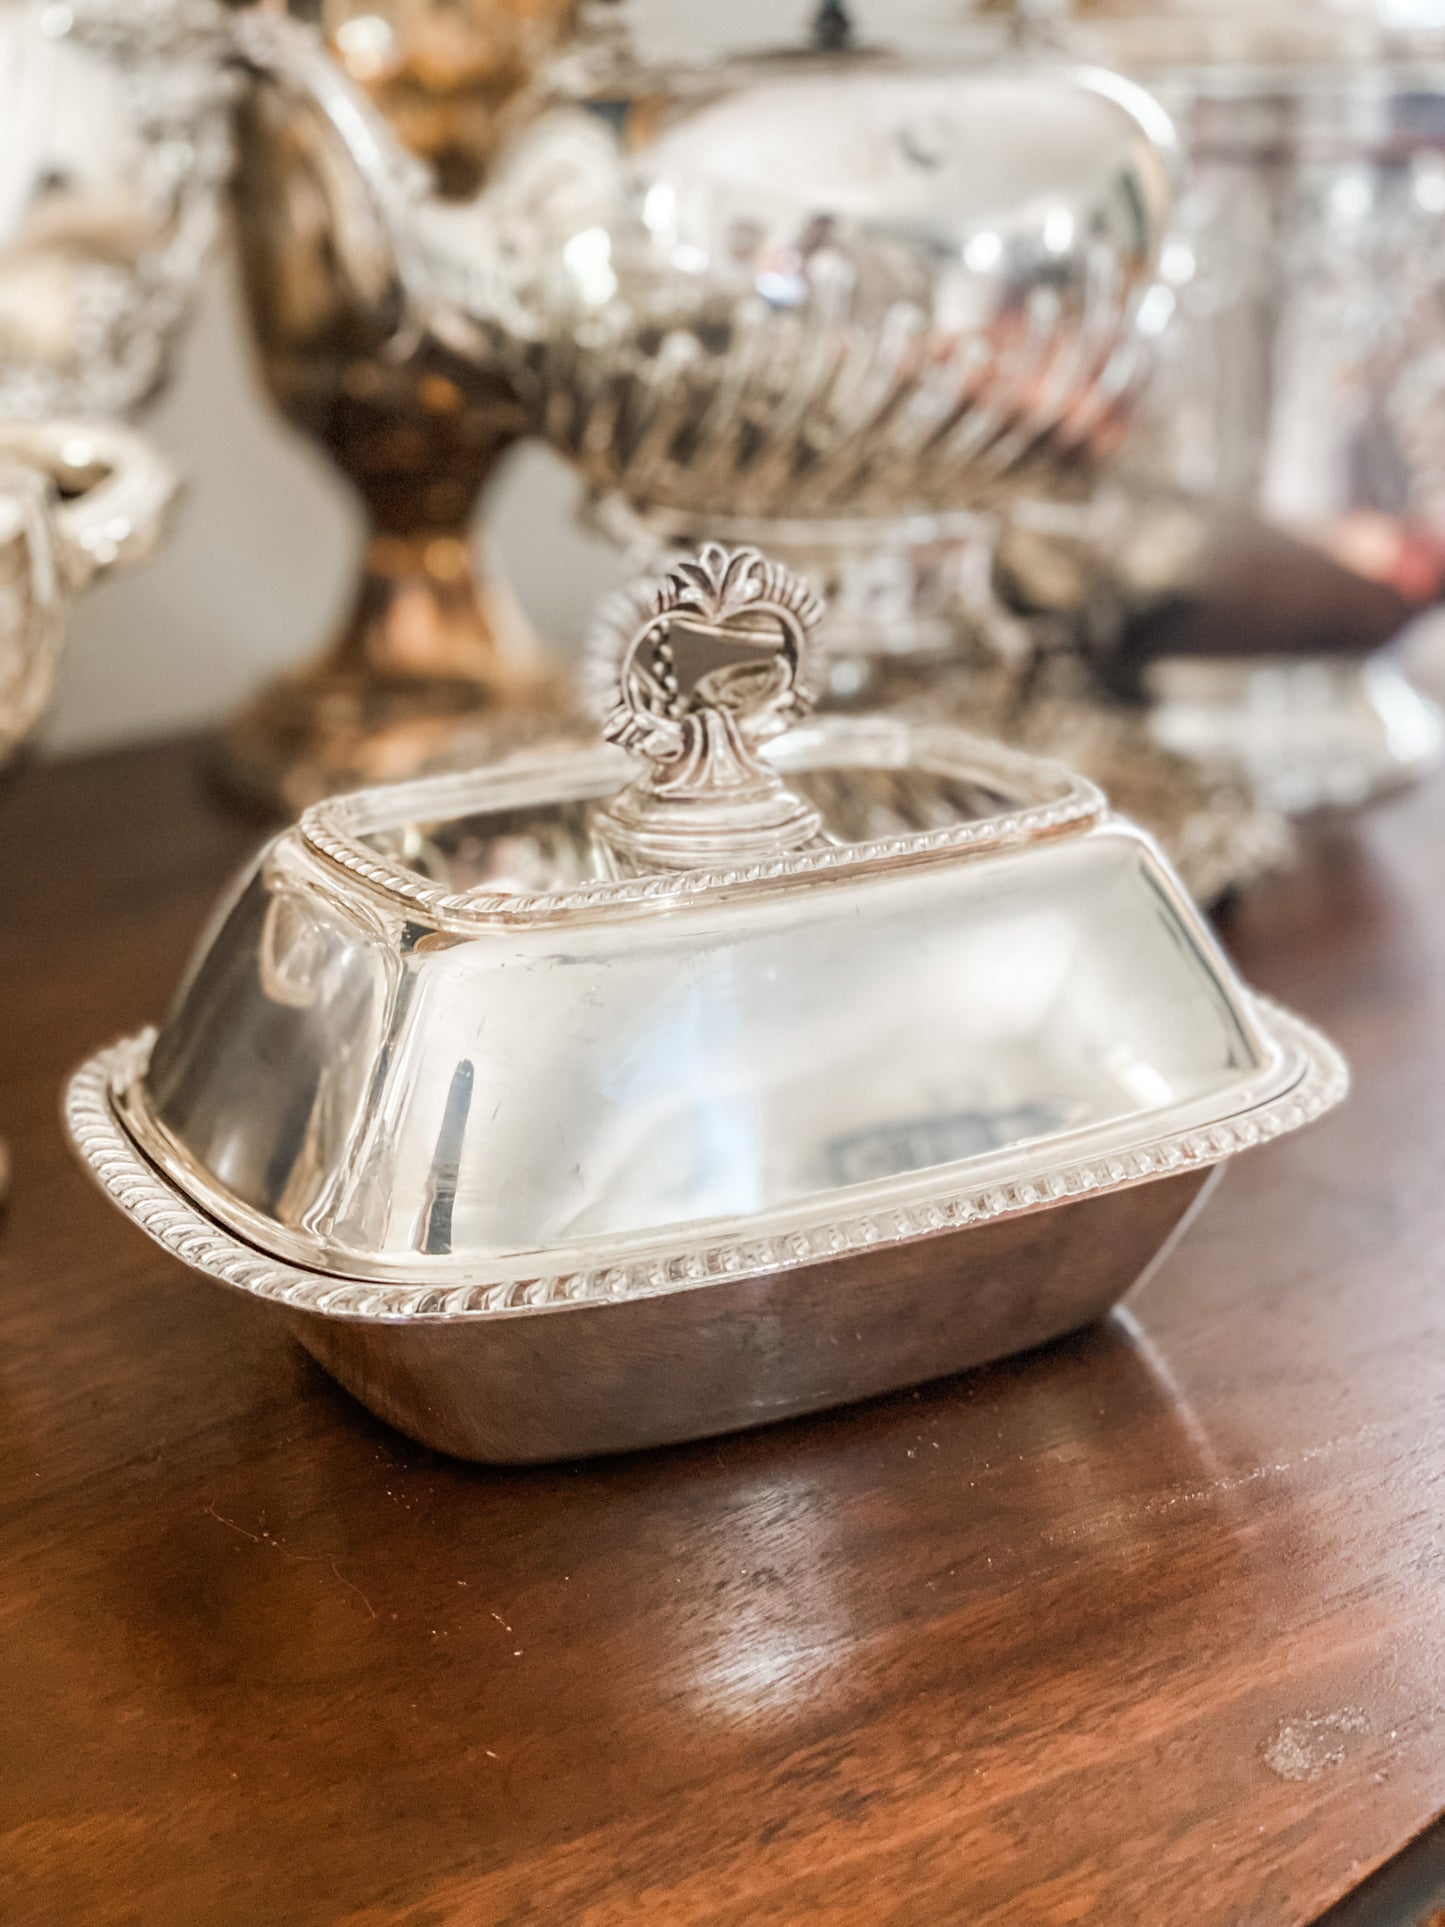 Delightful Antique Covered Dish